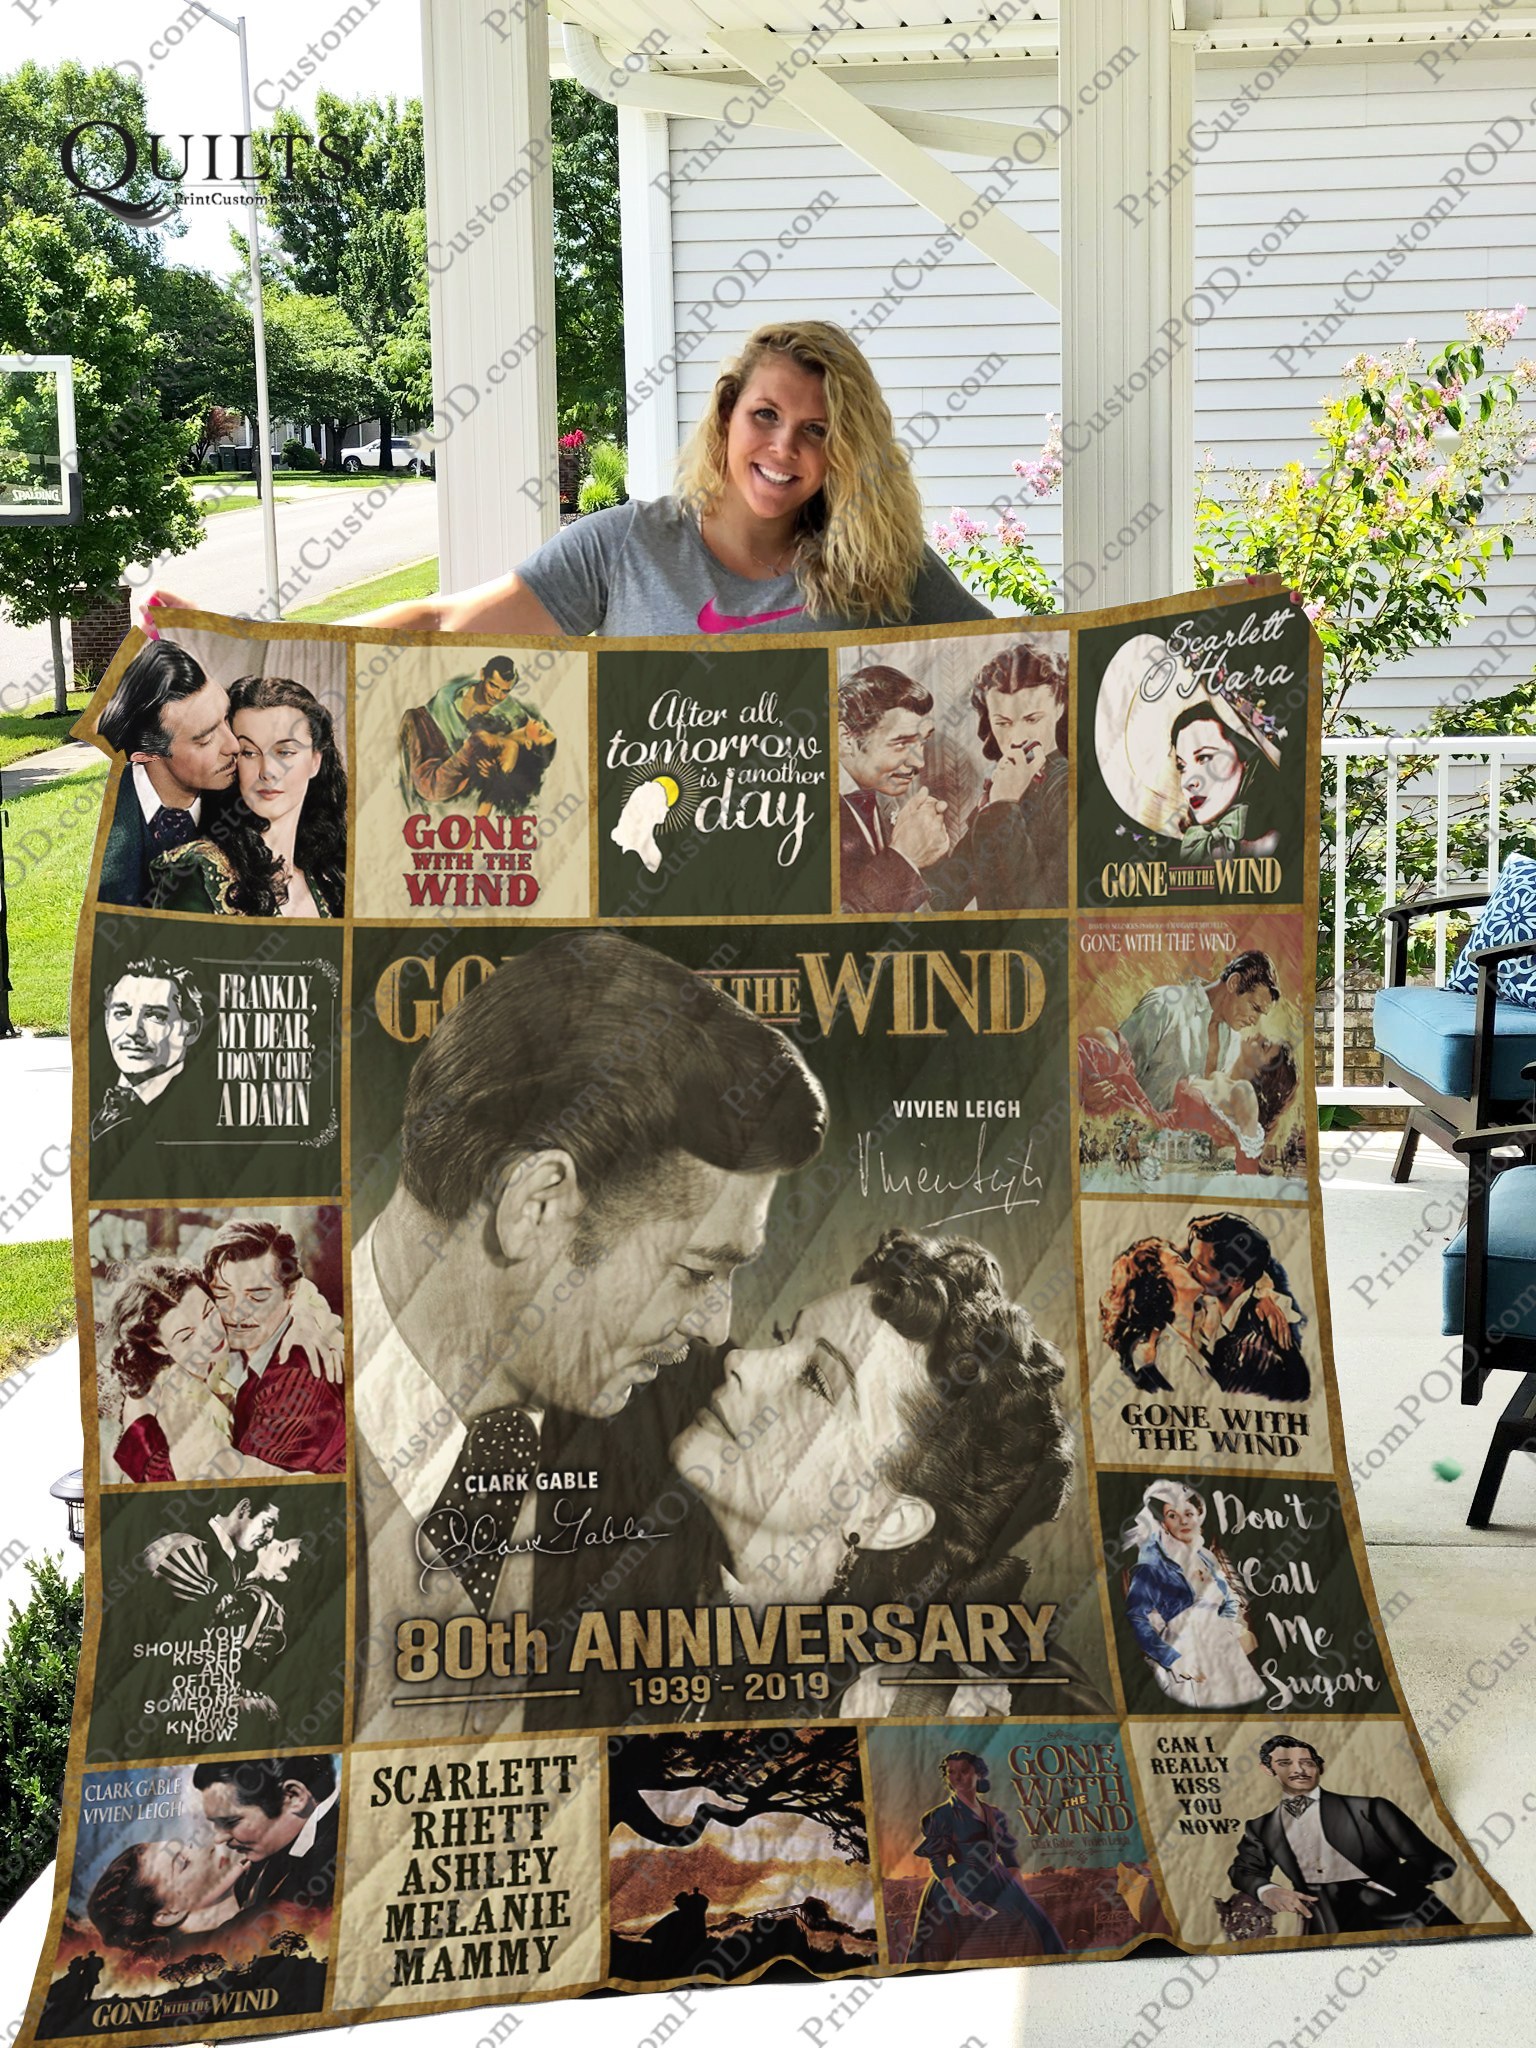 Gone with the wind 80th anniversary quilt 4